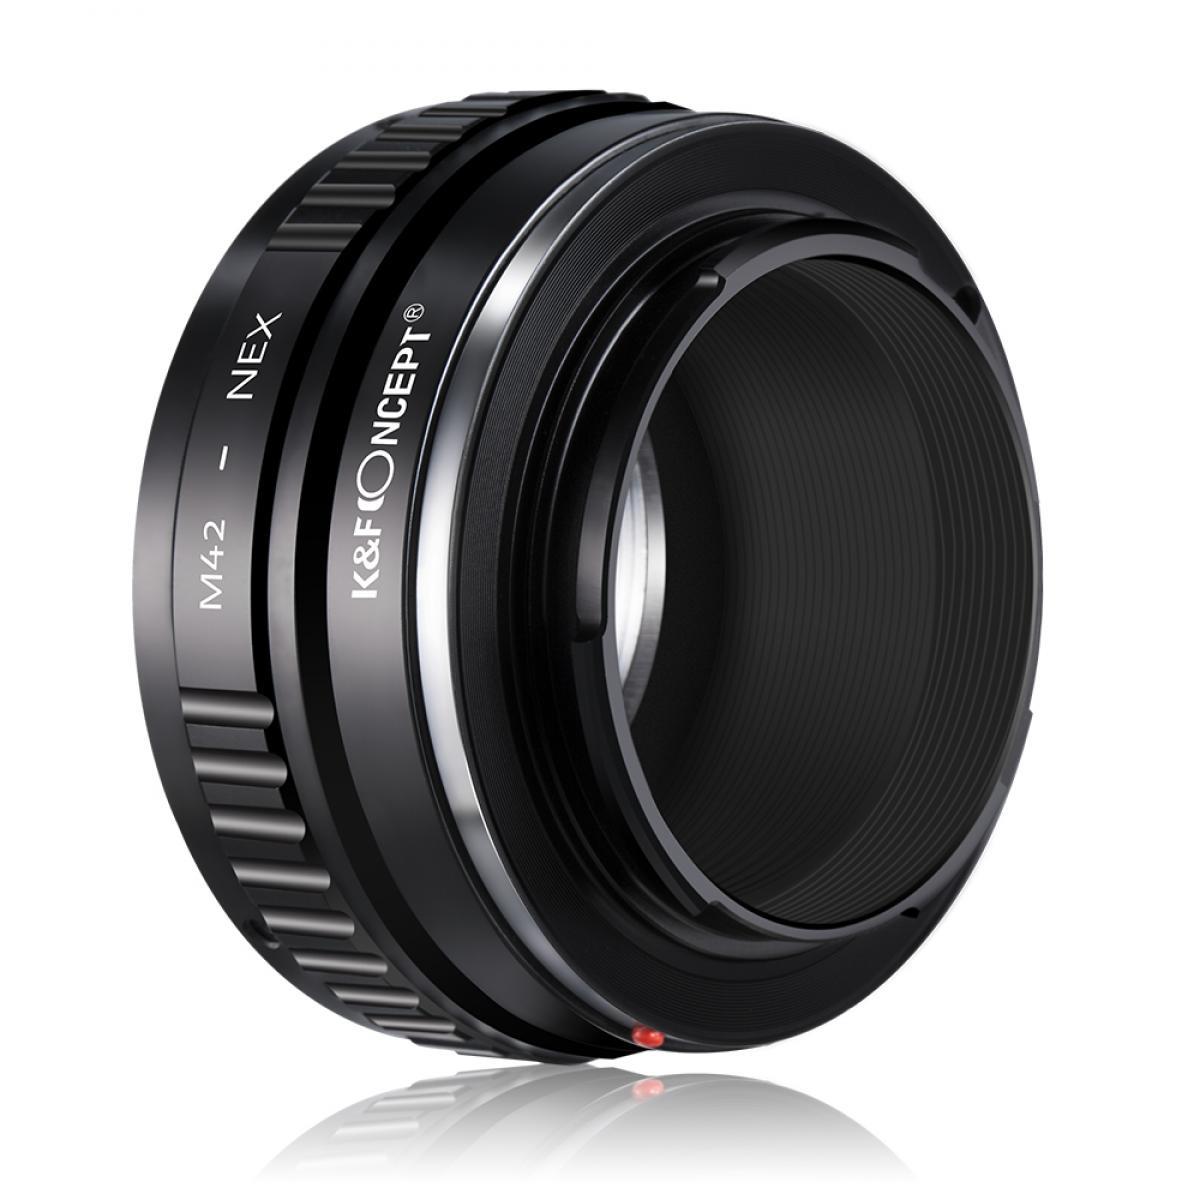 K&F Concept M42-NEX High Precision Lens Adapter Mount for M42 Mount Lens to Sony E-Mount Body Mirrorless Camera